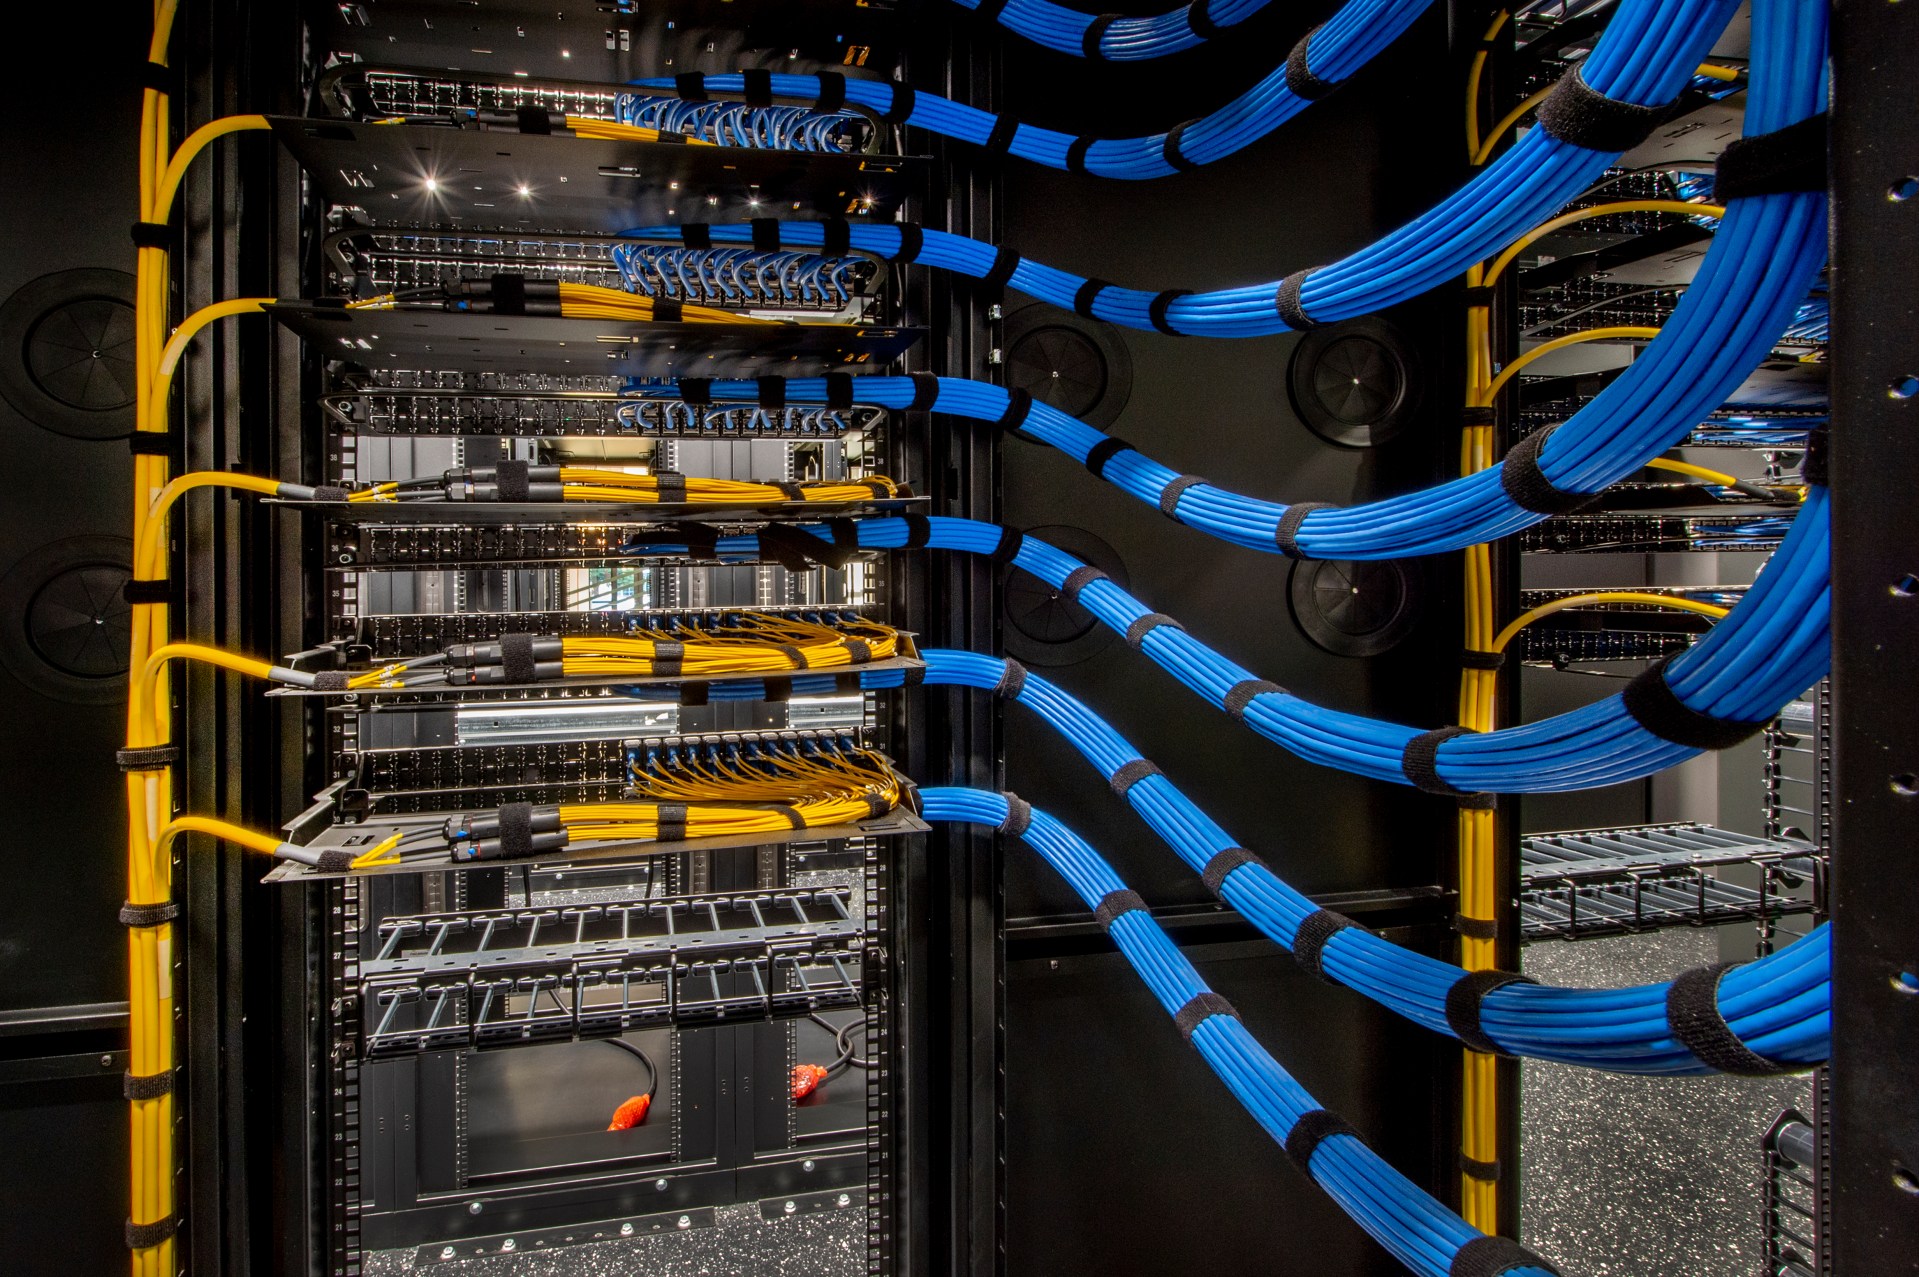 The Many Methods Of Connection At Colocation Facilities